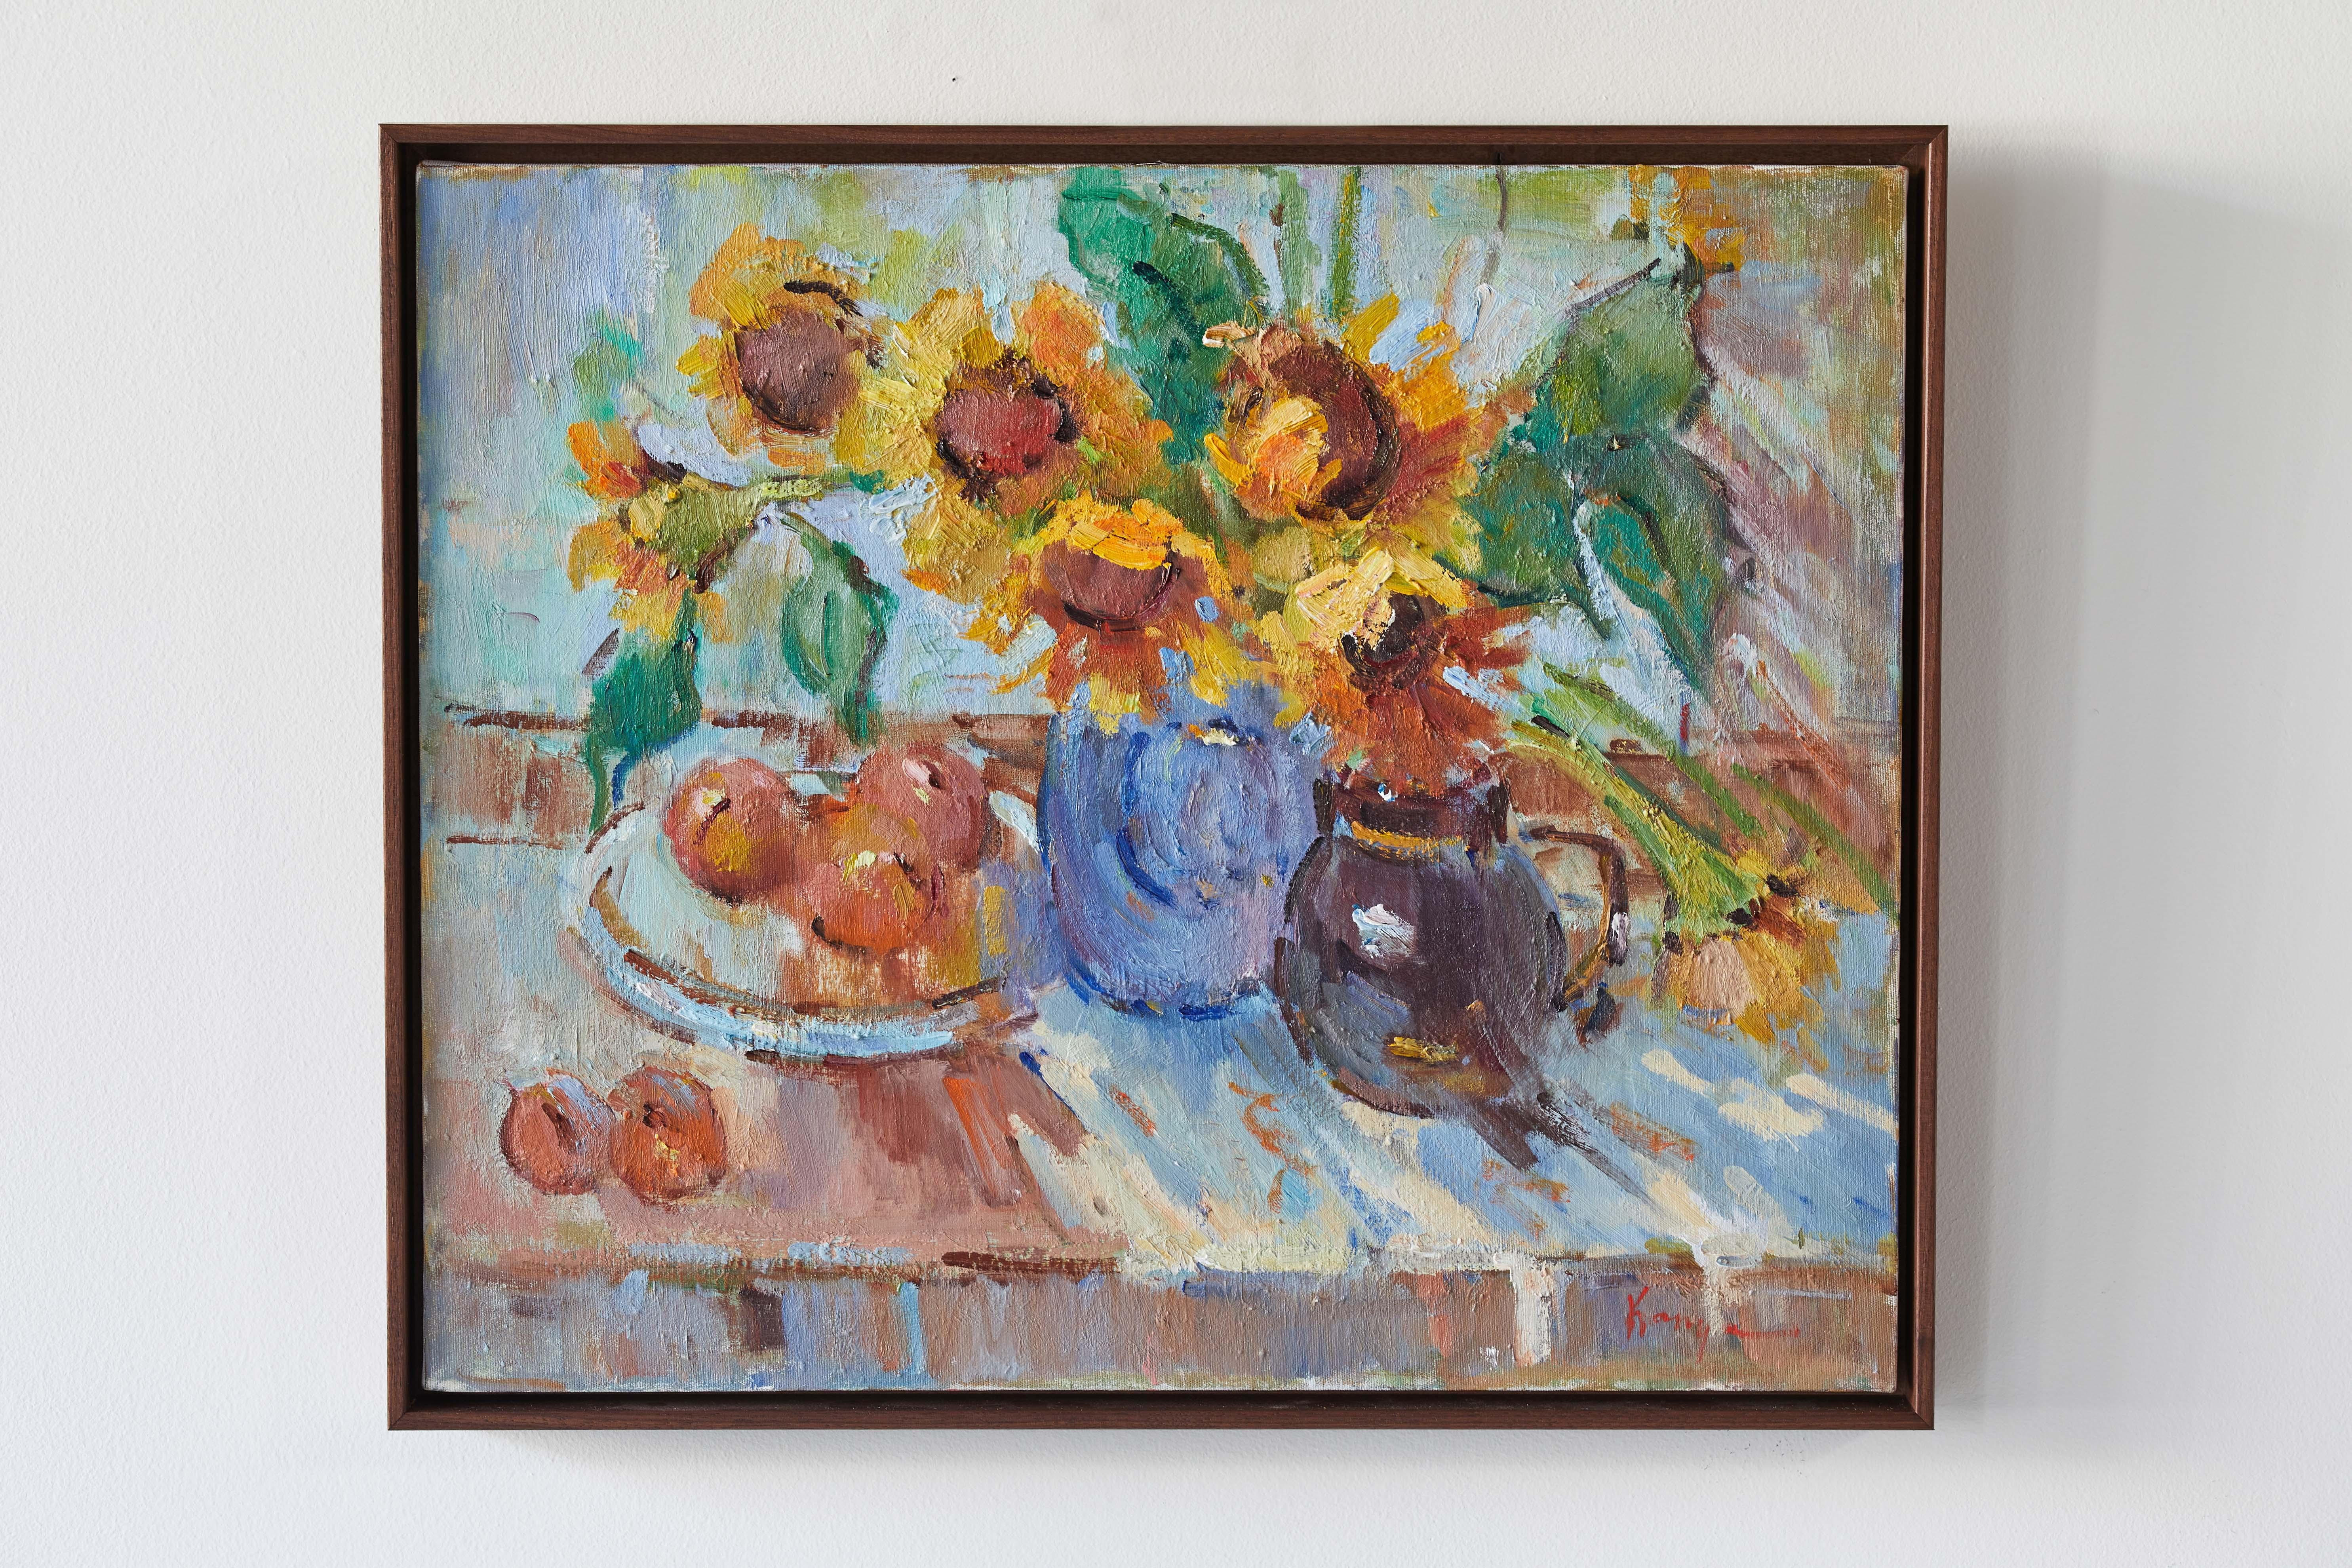 French still life painting of sunflowers and fruit with warm hues of yellows, oranges, and blues.